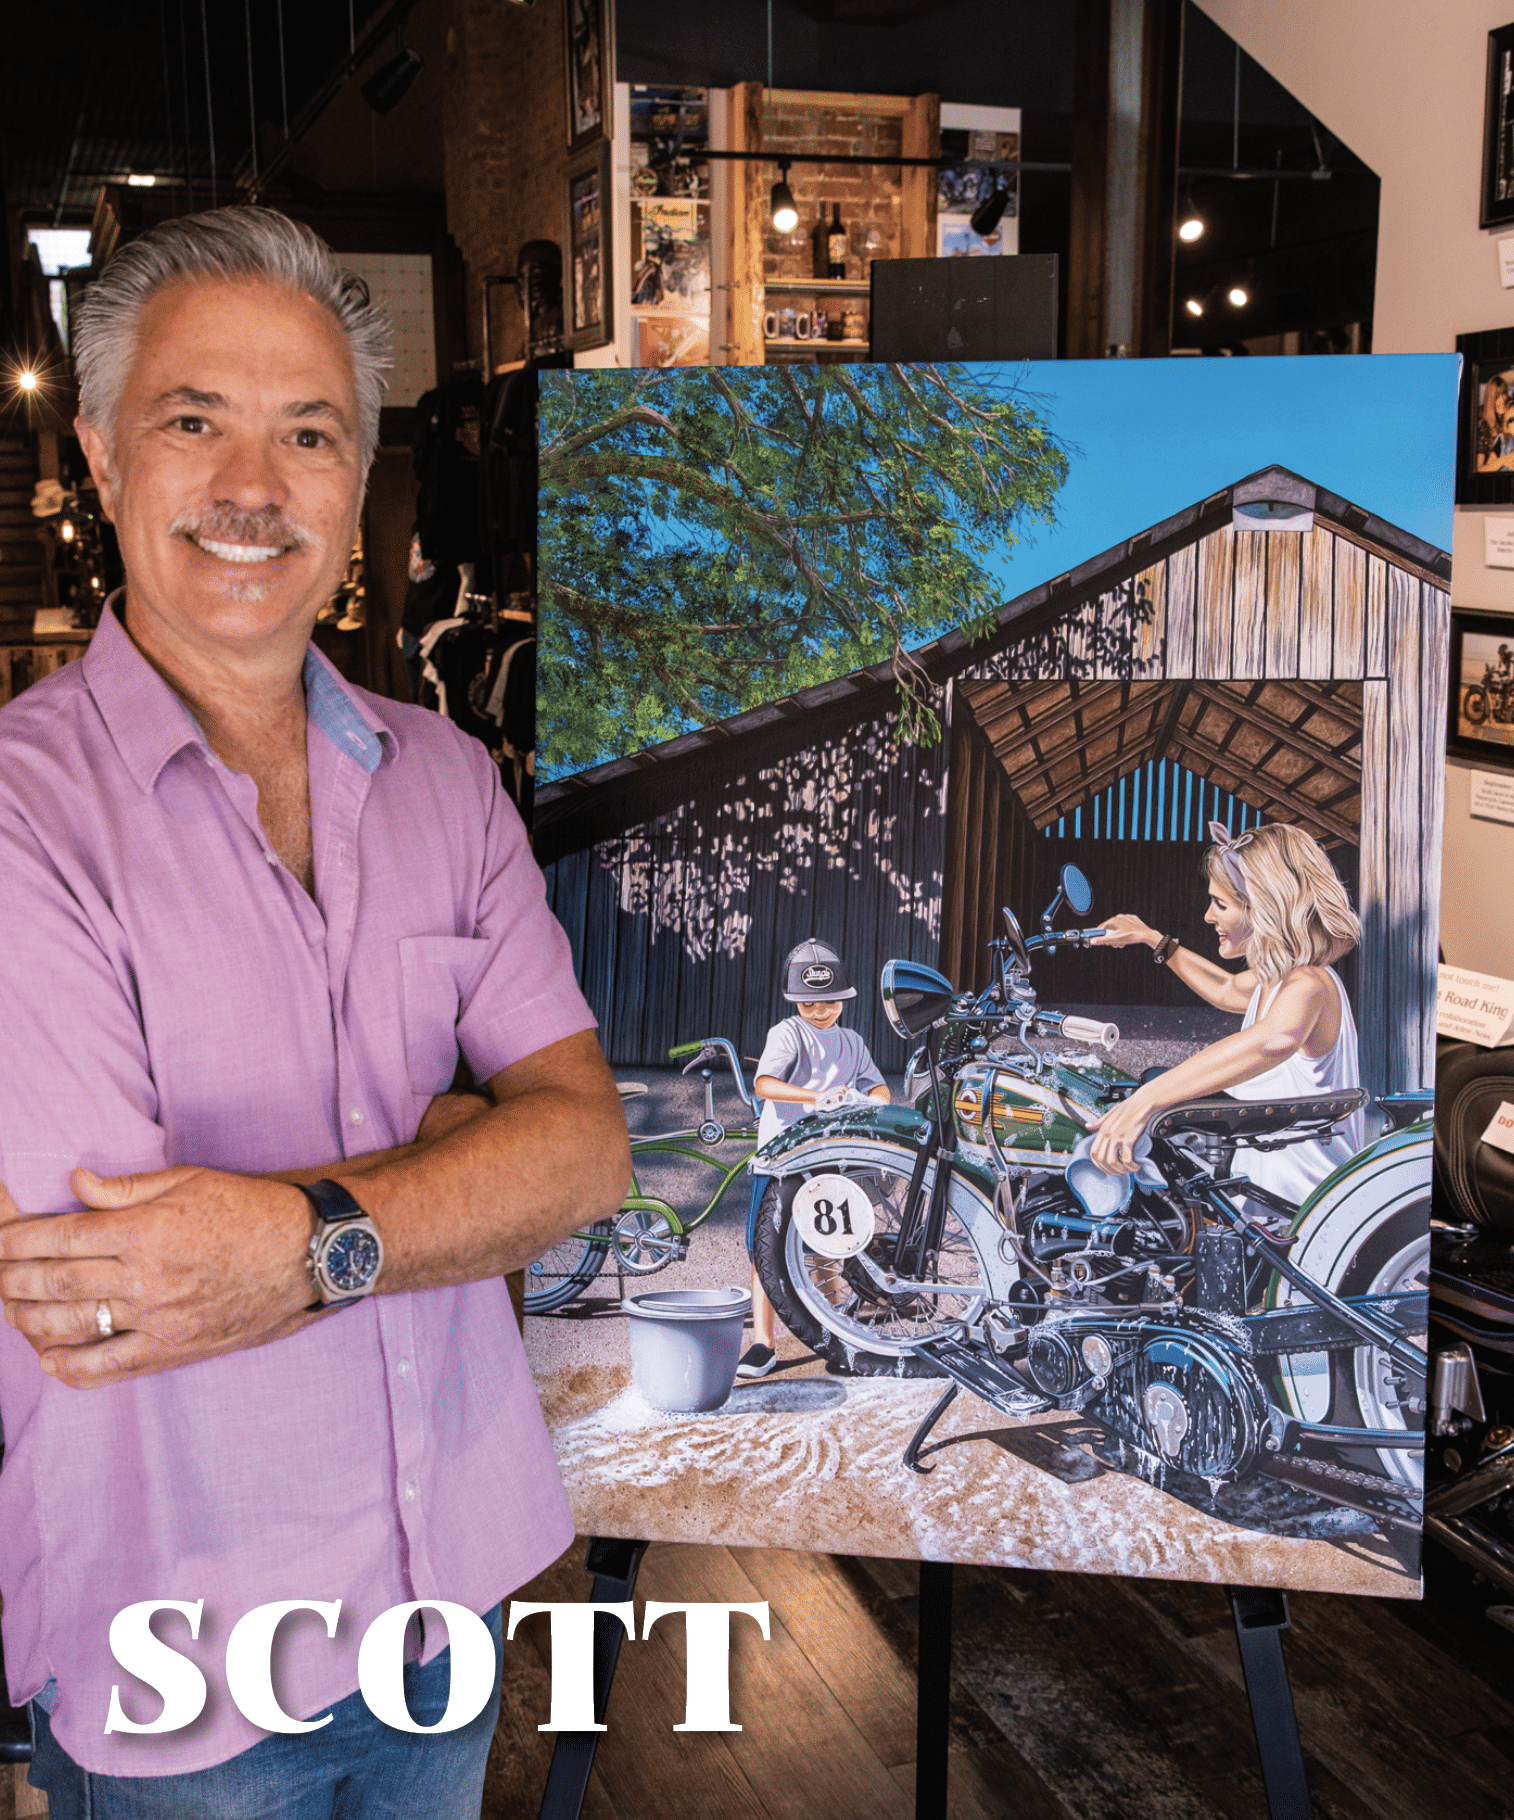 artist Scott jacobs standing with his Sturgis motorcycle painting, Moments Like These